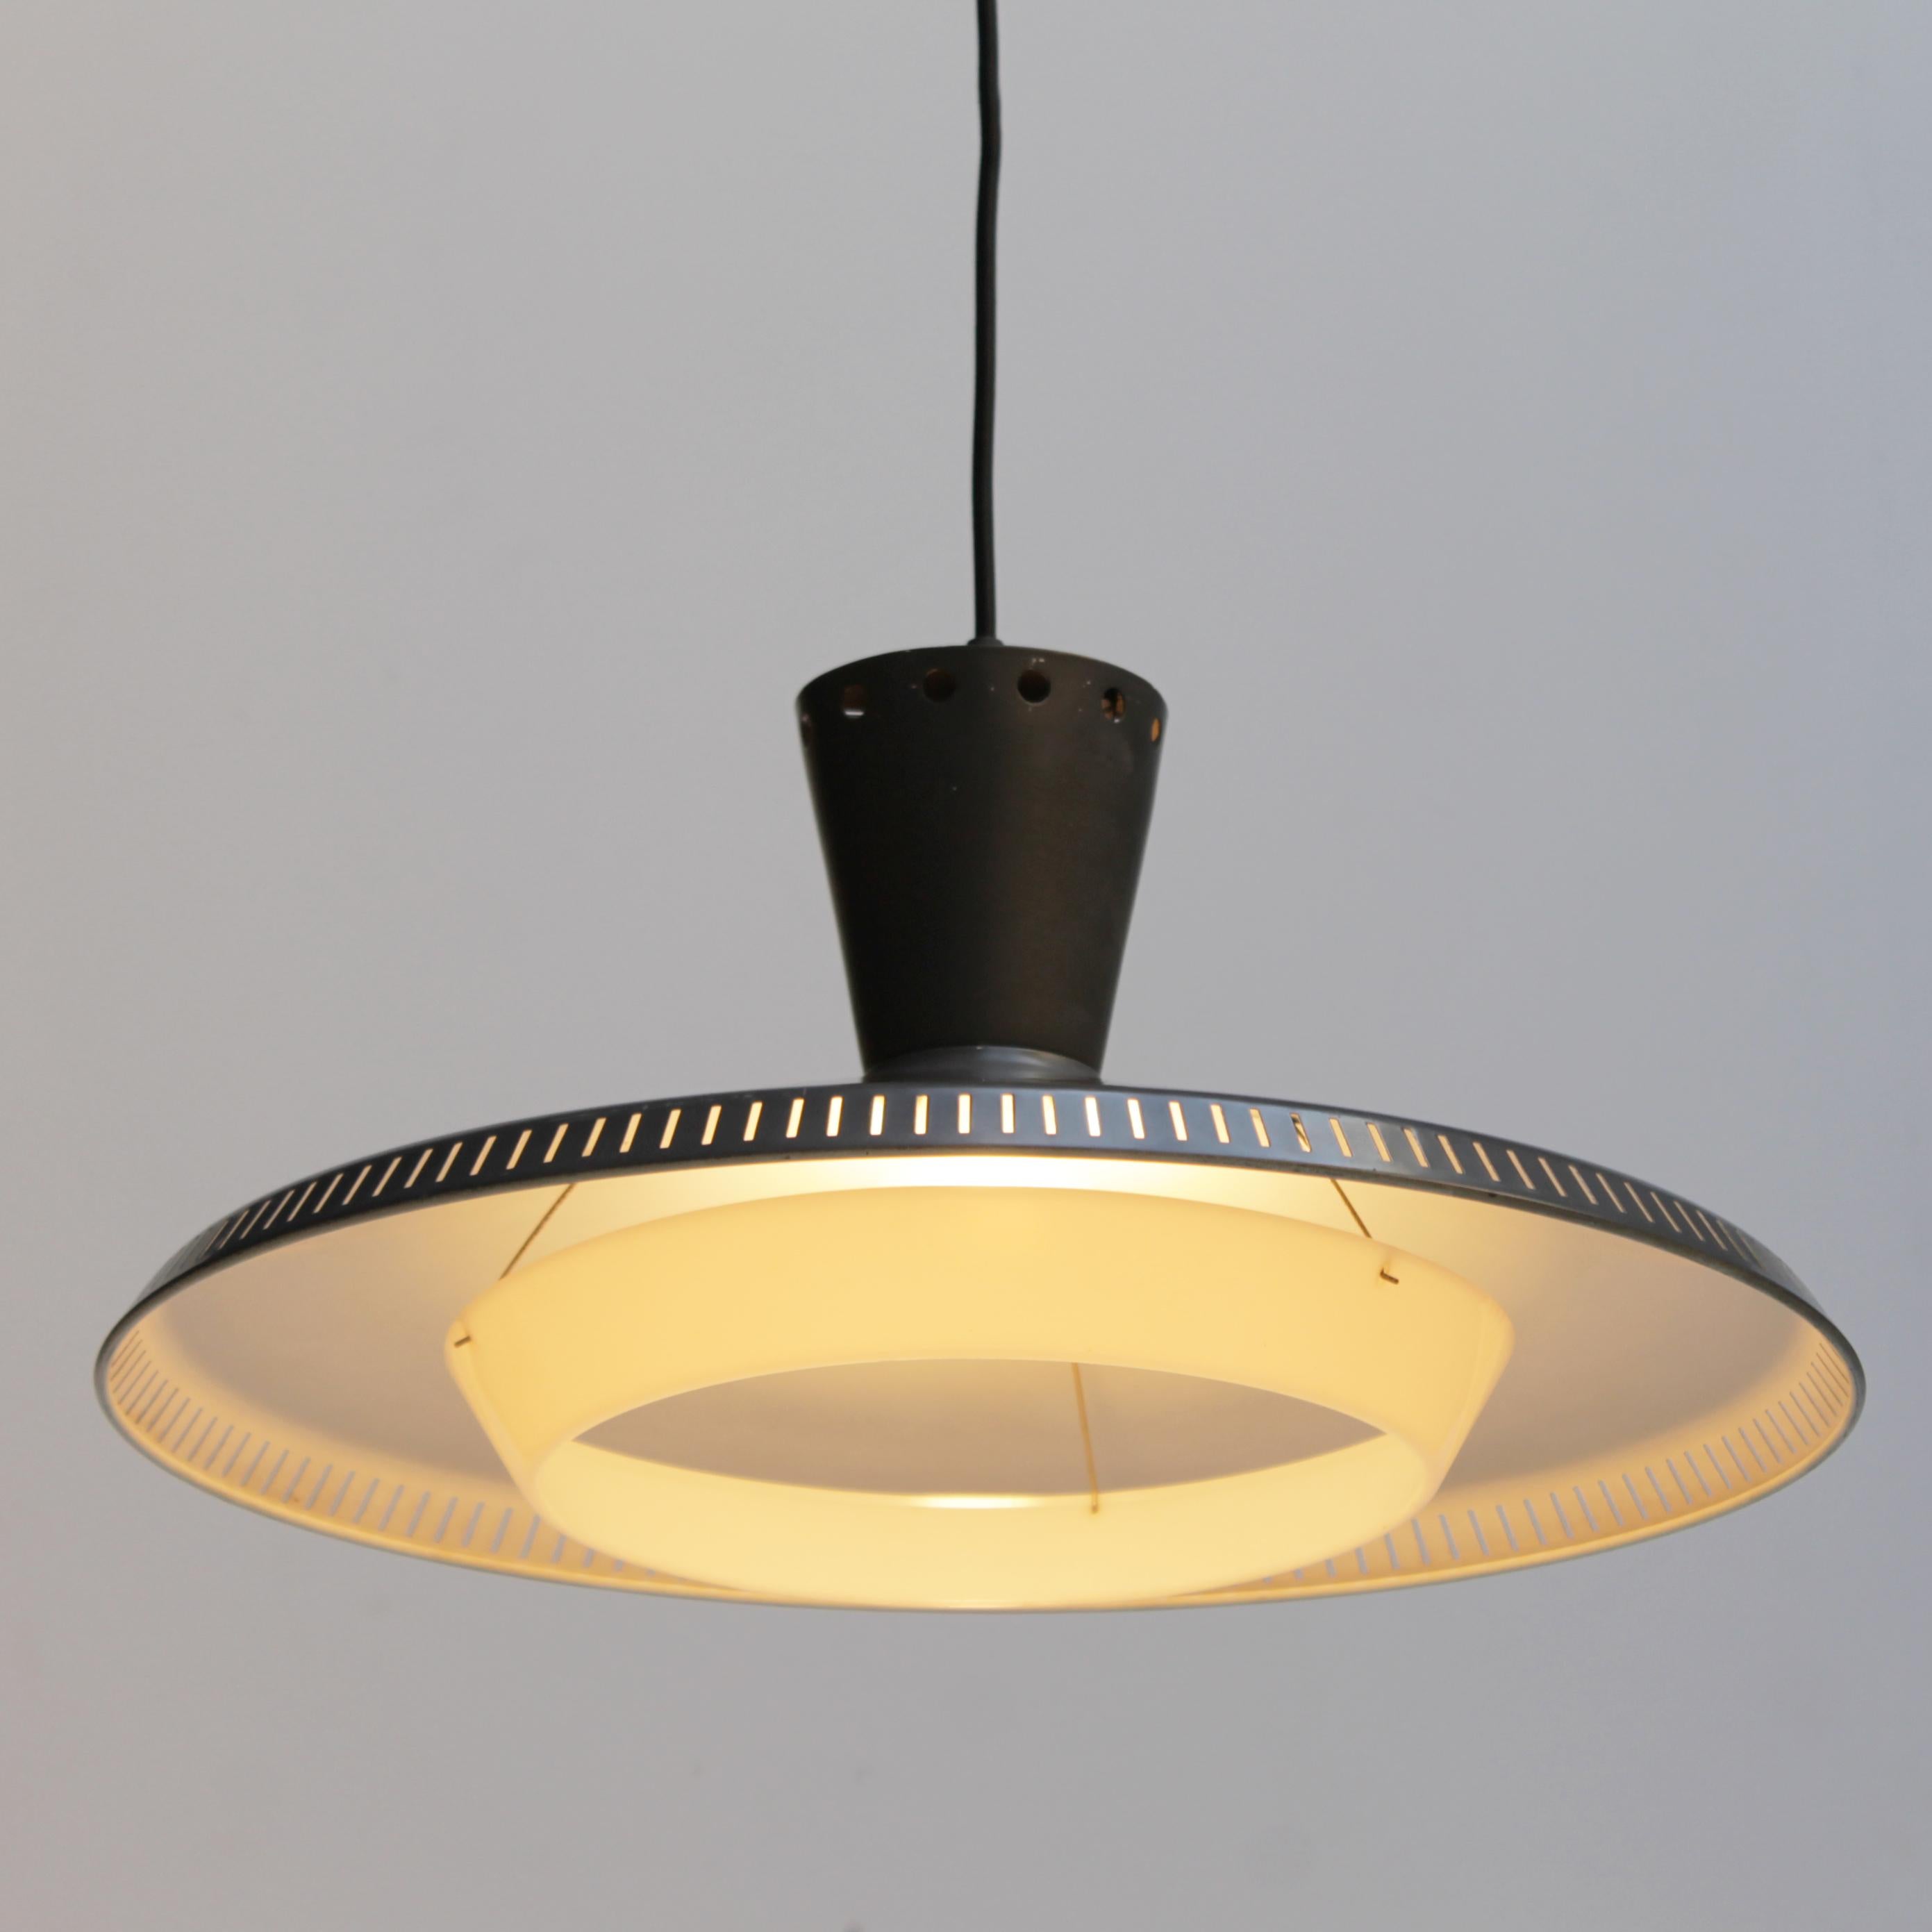 Black (charcoal) pendant lamp by Louis Kalff for Philips, Dutch 1950’s.
Dimensions: Height 23 cm x diameter 48 cm.
The fixture is equipped with the original, regular (E26-E27) Edison screw lamp socket. Max. 40 Watt. Electric parts are in a used